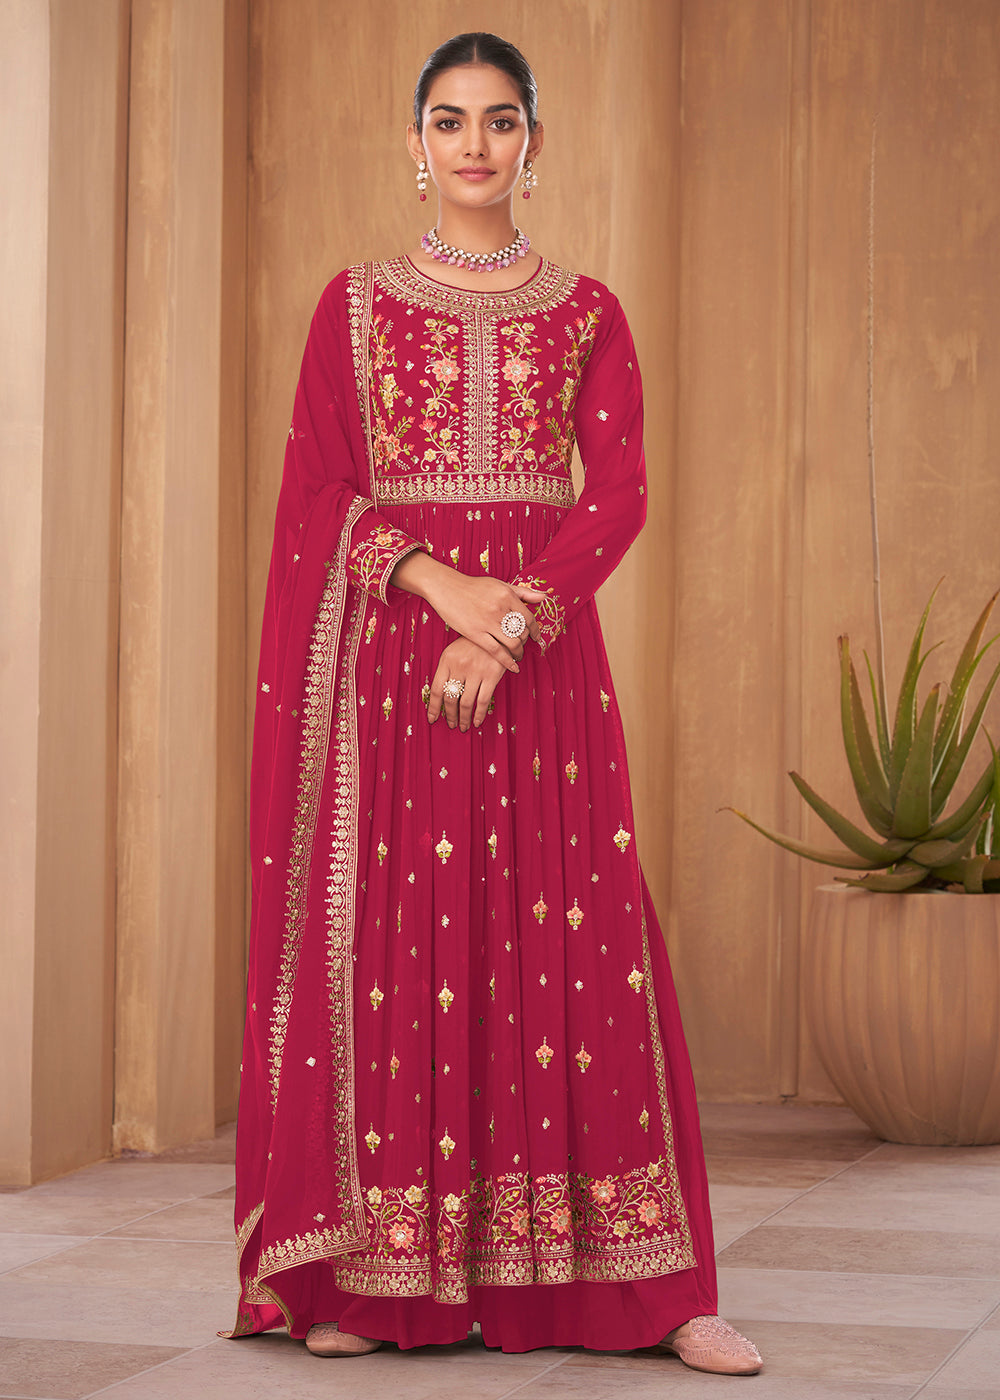 Buy Now Party Style Hot Pink Georgette Palazzo Salwar Kurta Online in USA, UK, Canada & Worldwide at Empress Clothing.